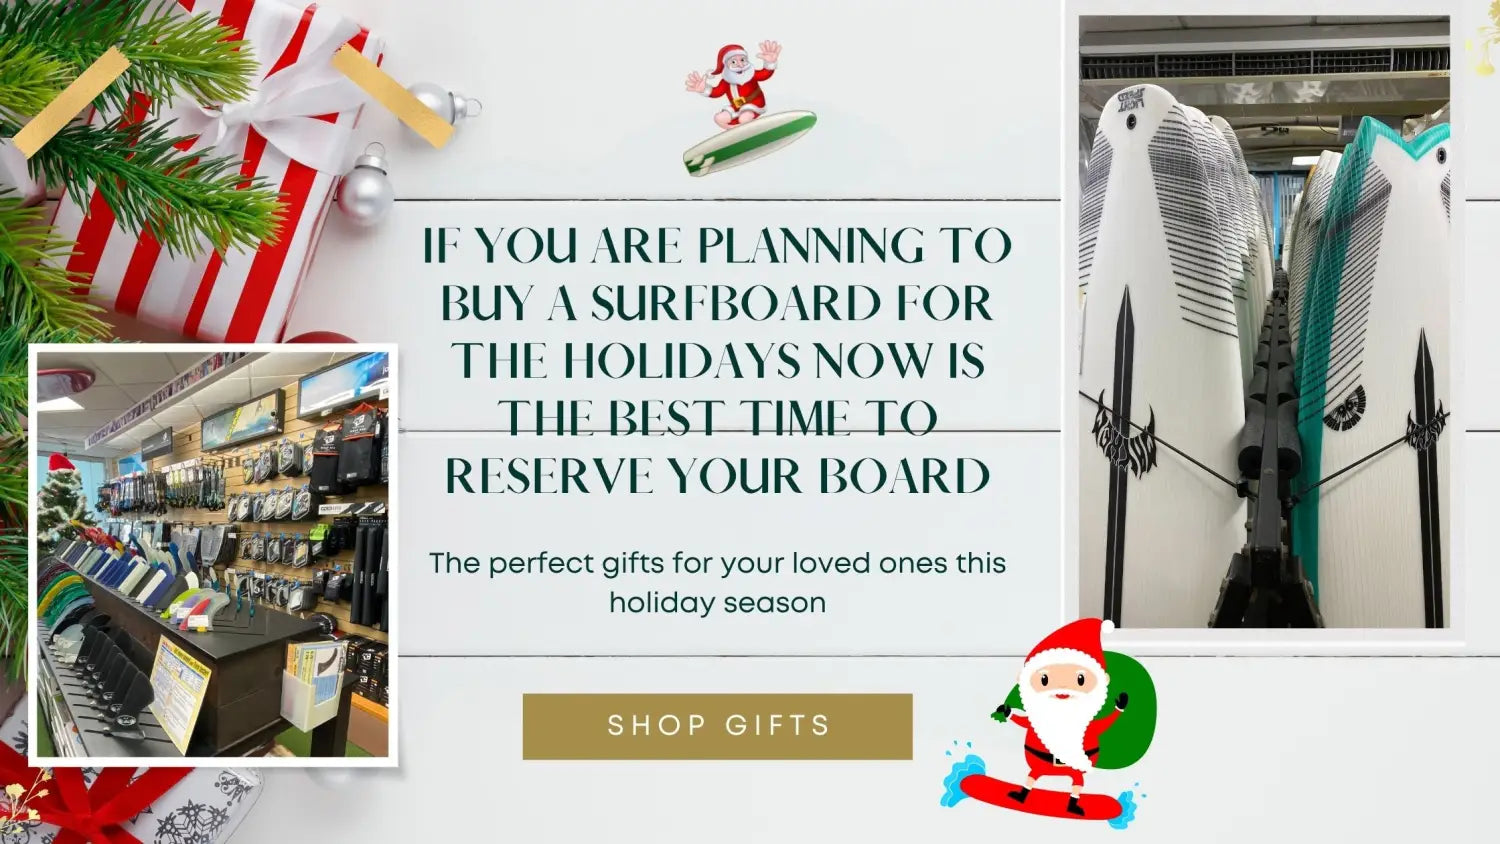 Surfboard Shoping for Christmas